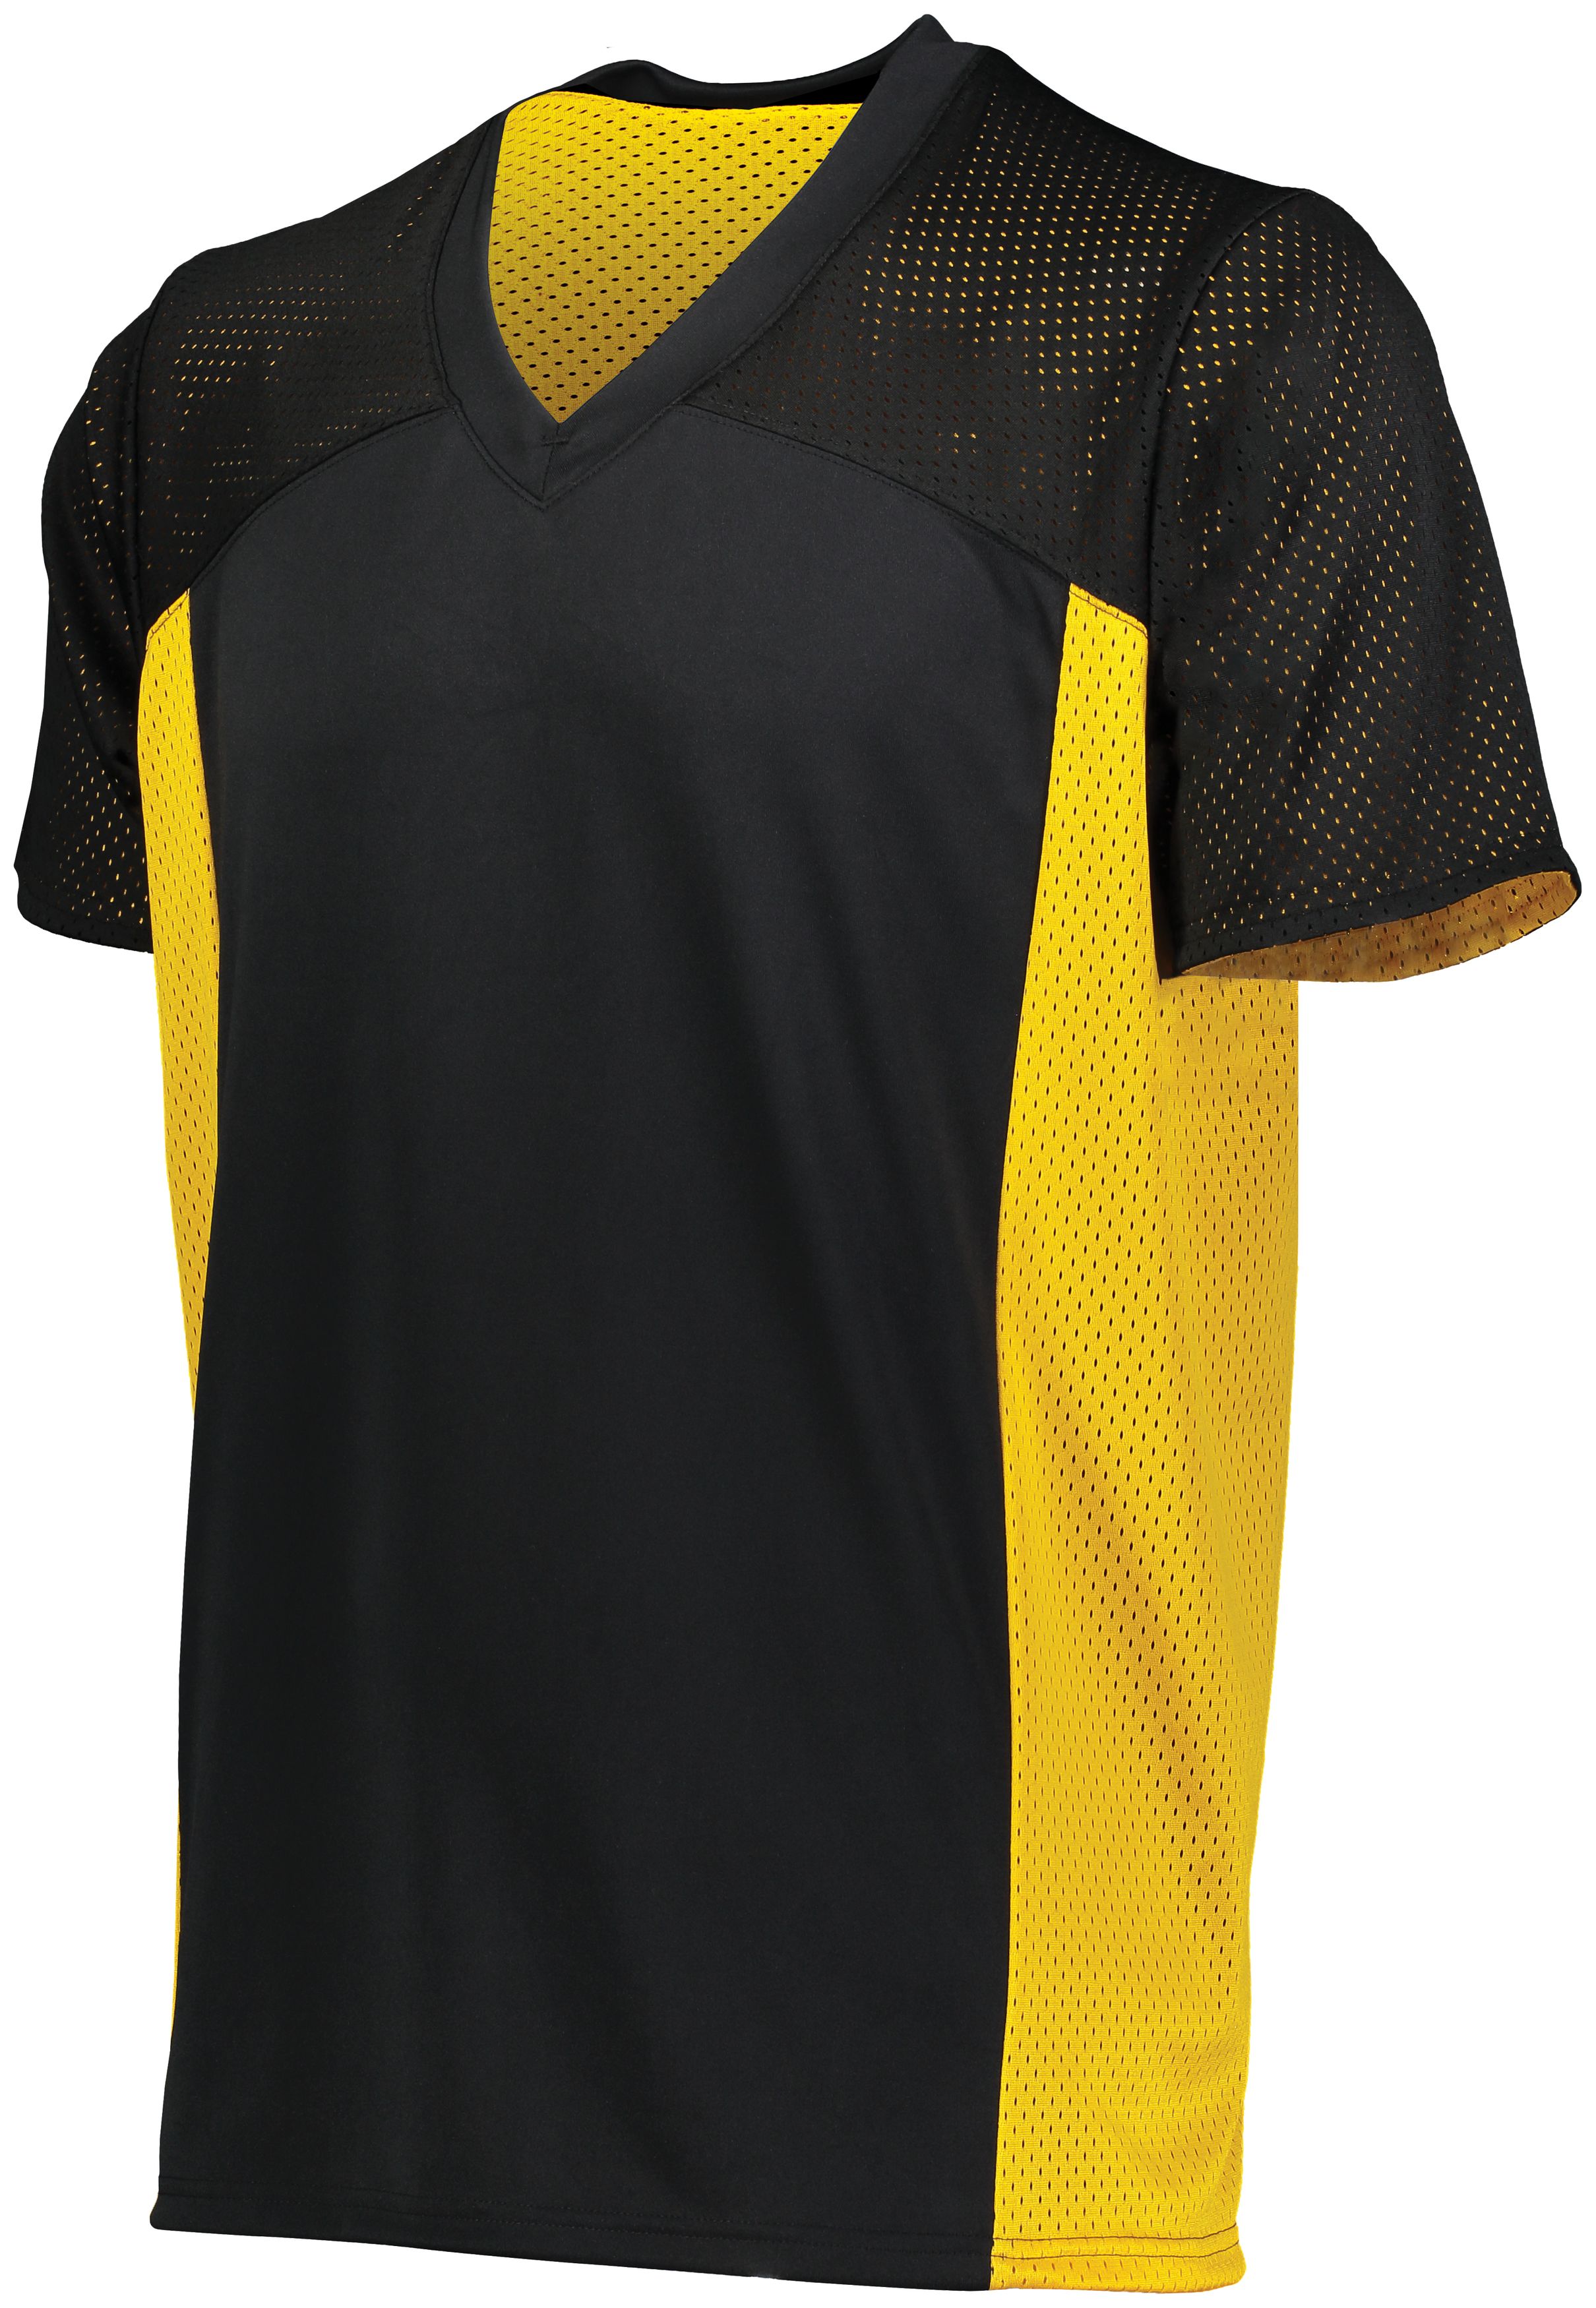 Youth Reversible Flag Football Jersey